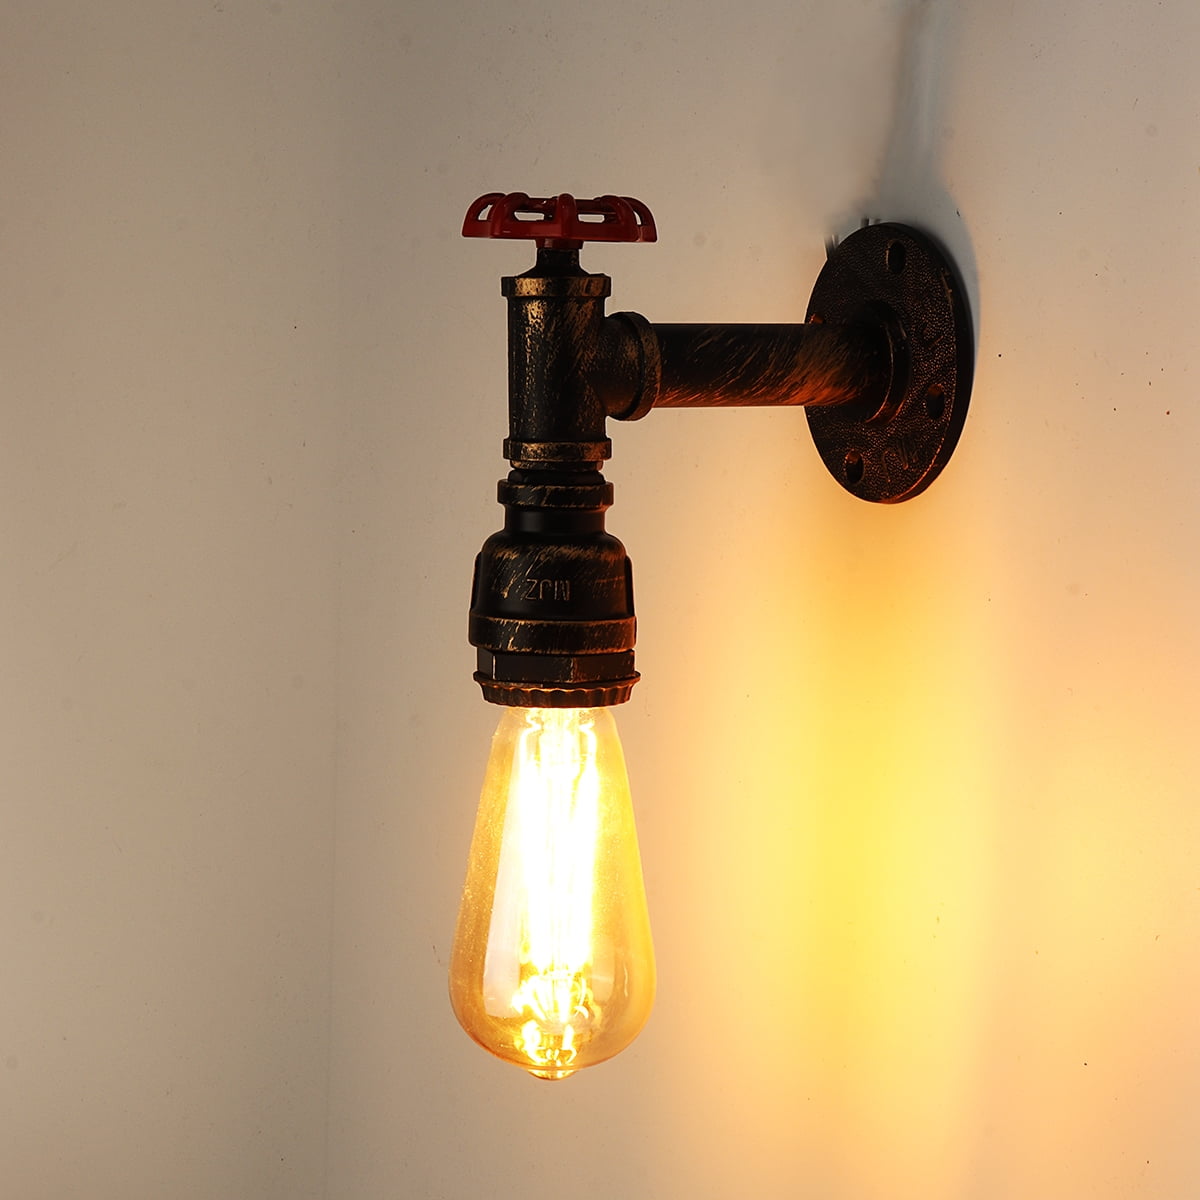 Retro Vintage Industrial Iron Water Pipe Wall Lamp Faucet Sconce Light Fixture 